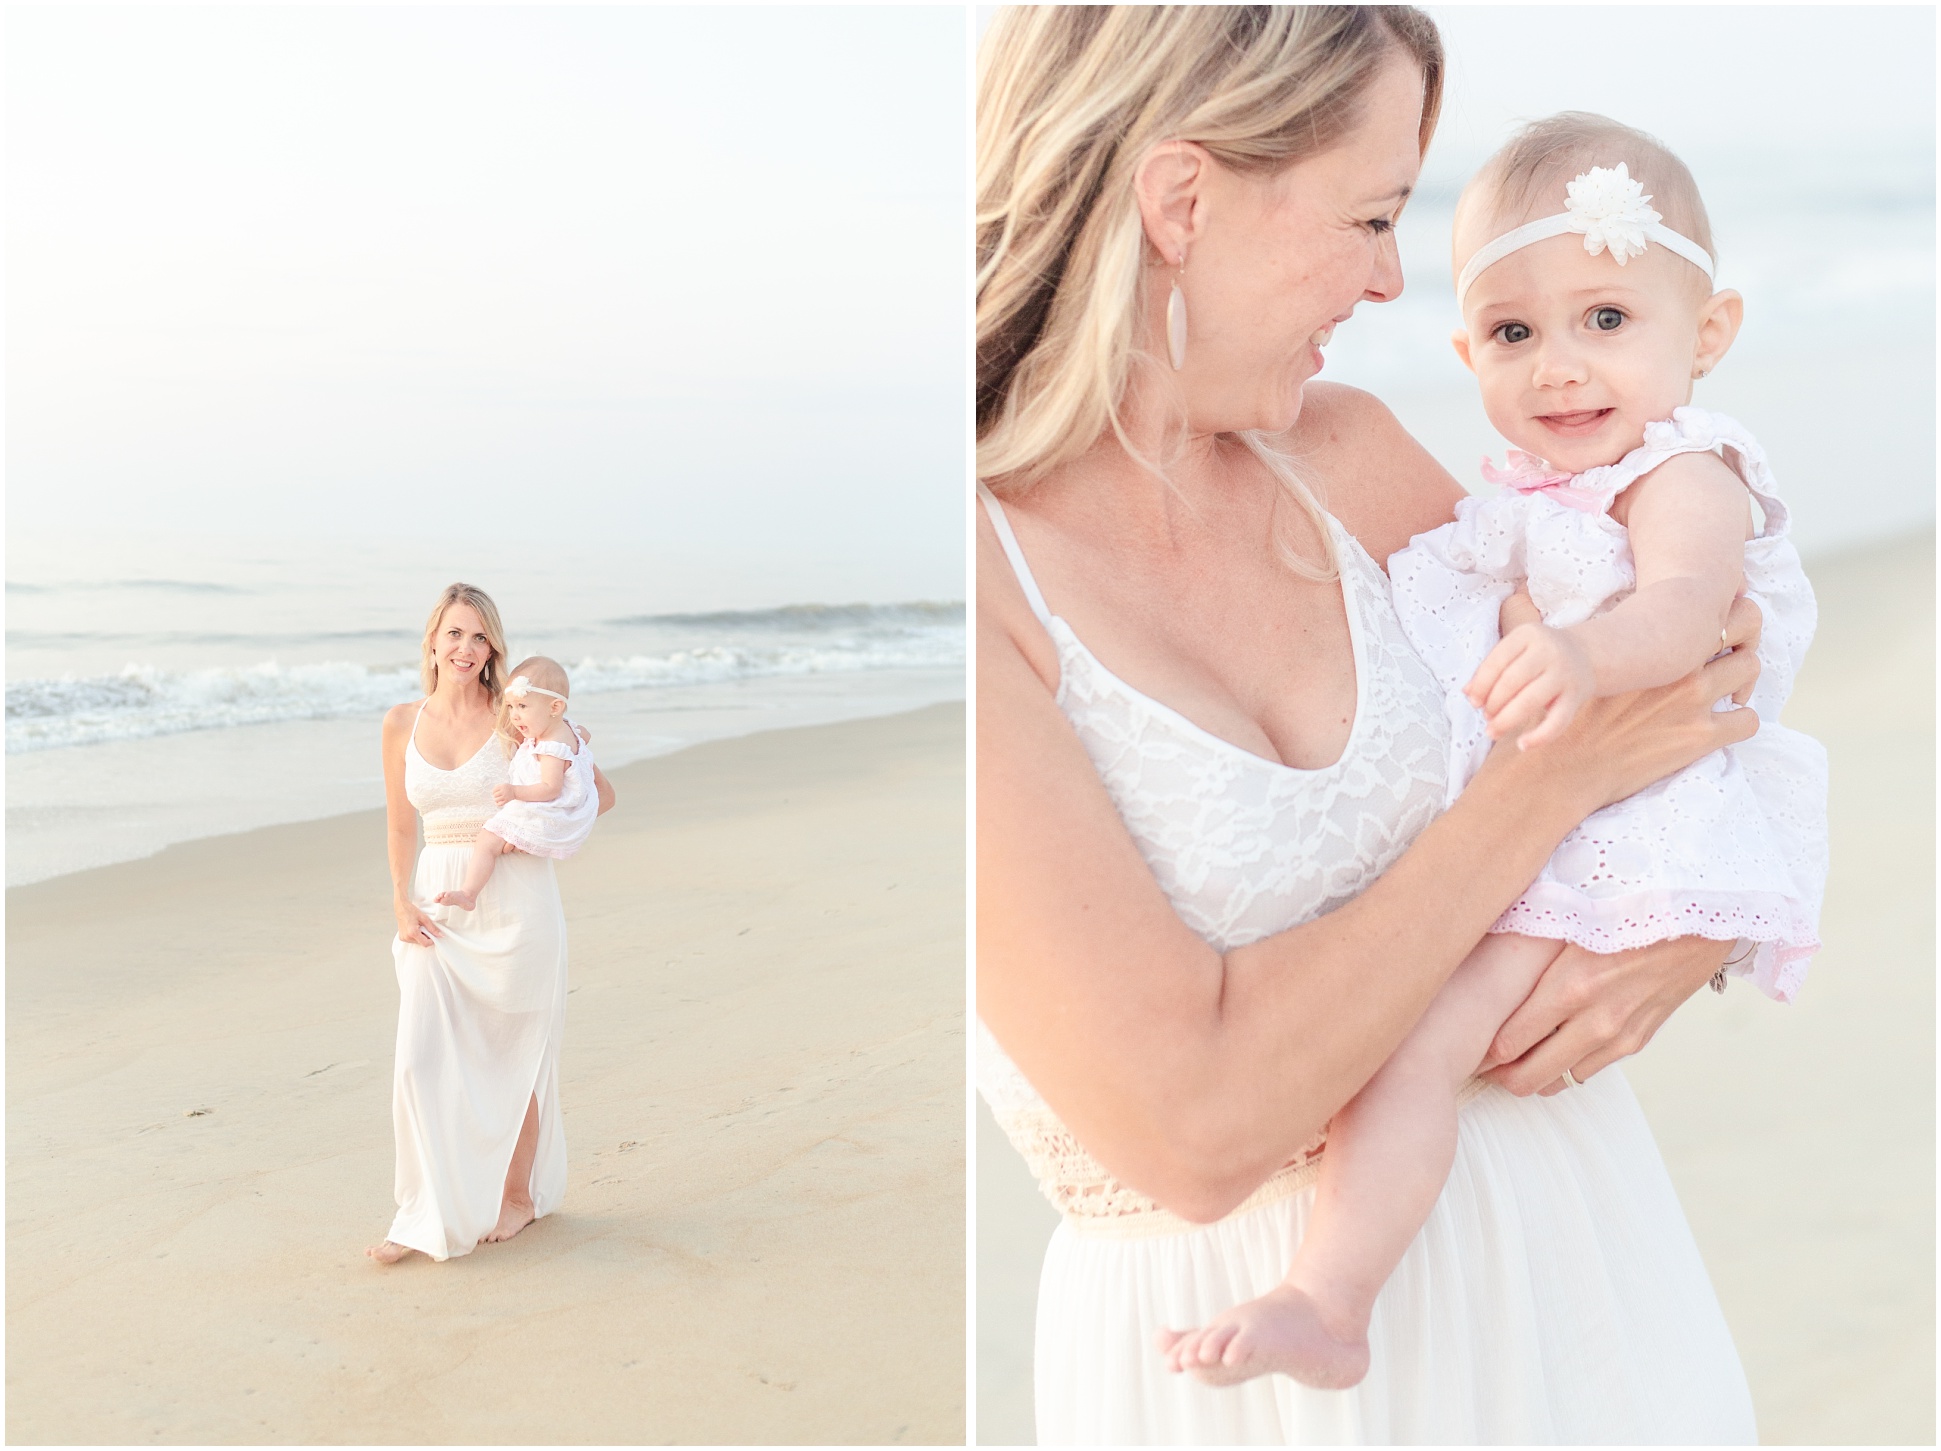 Two images of a new mommy and her baby girl walking on the beach in Ocean City MD